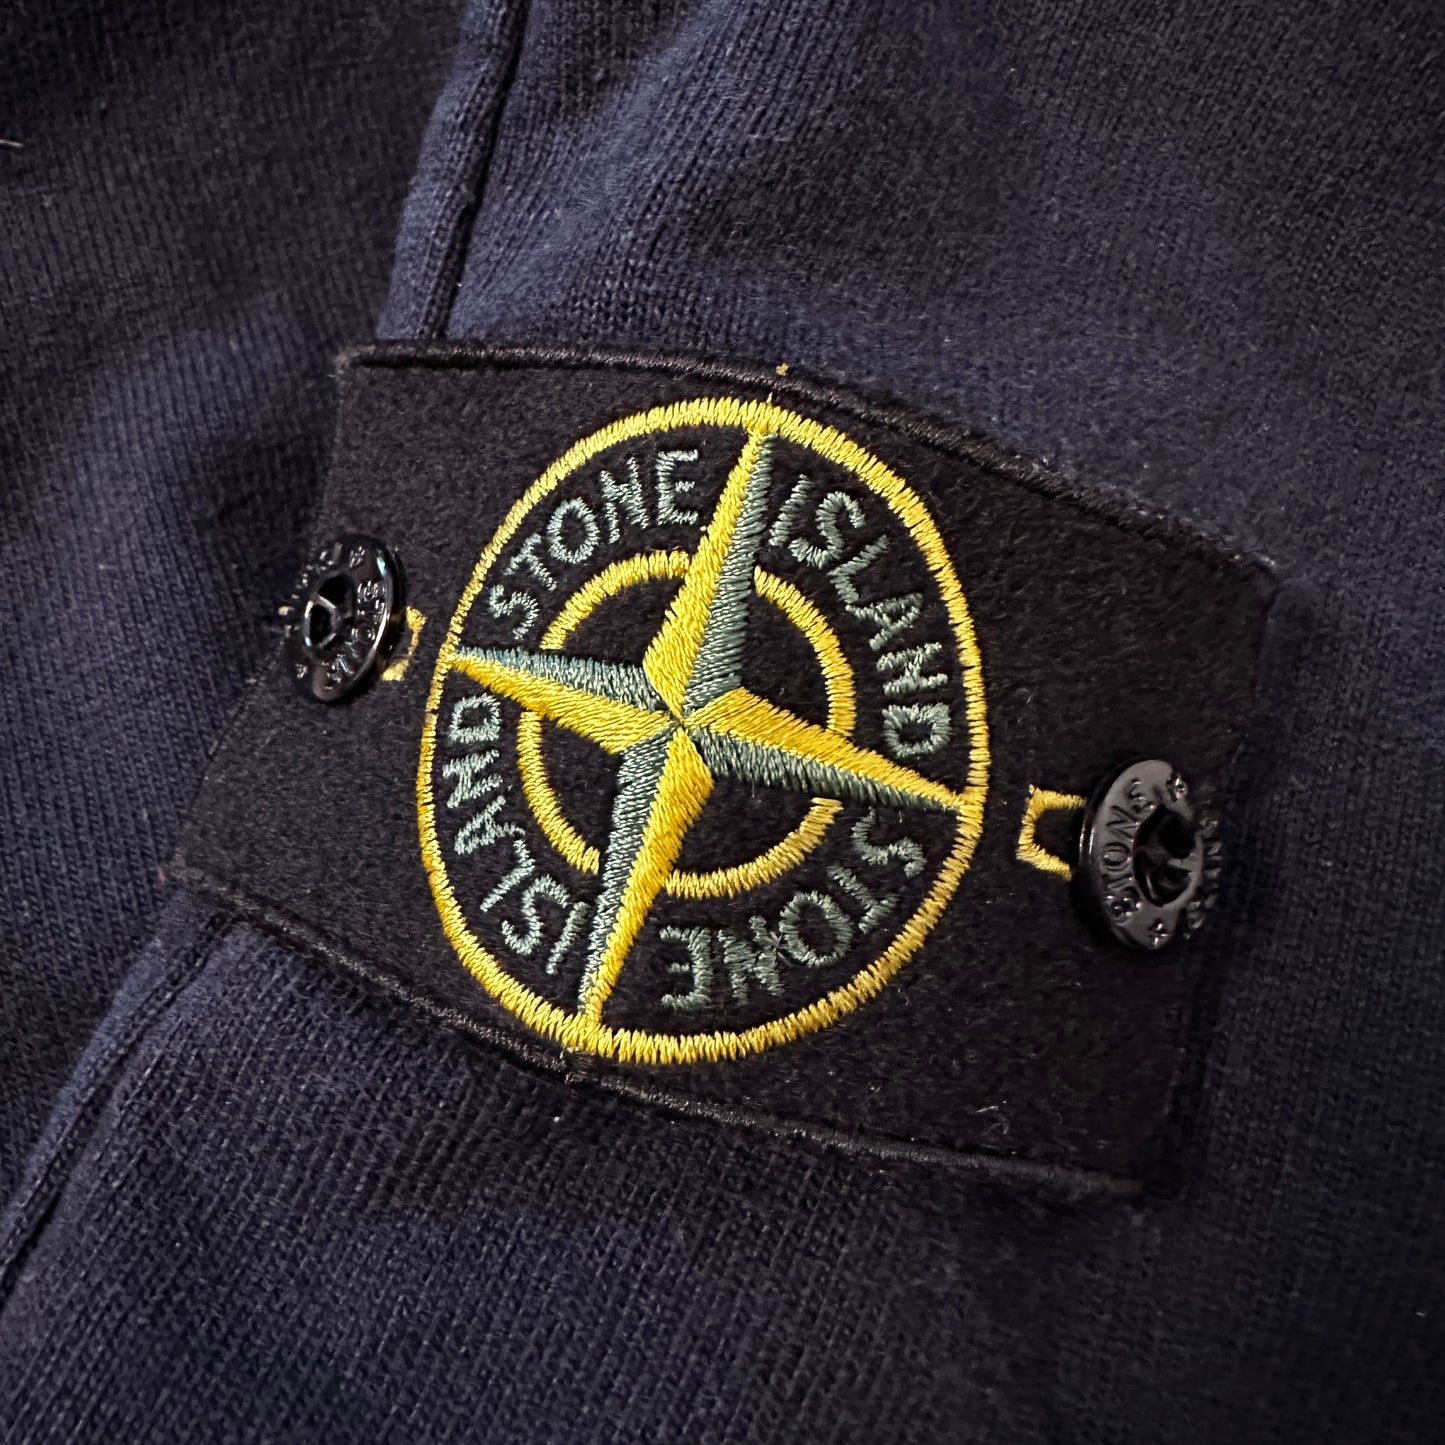 Stone Island 2014 Cotton Jersey with Nylon Pique Hoodie - XL - Made in Italy